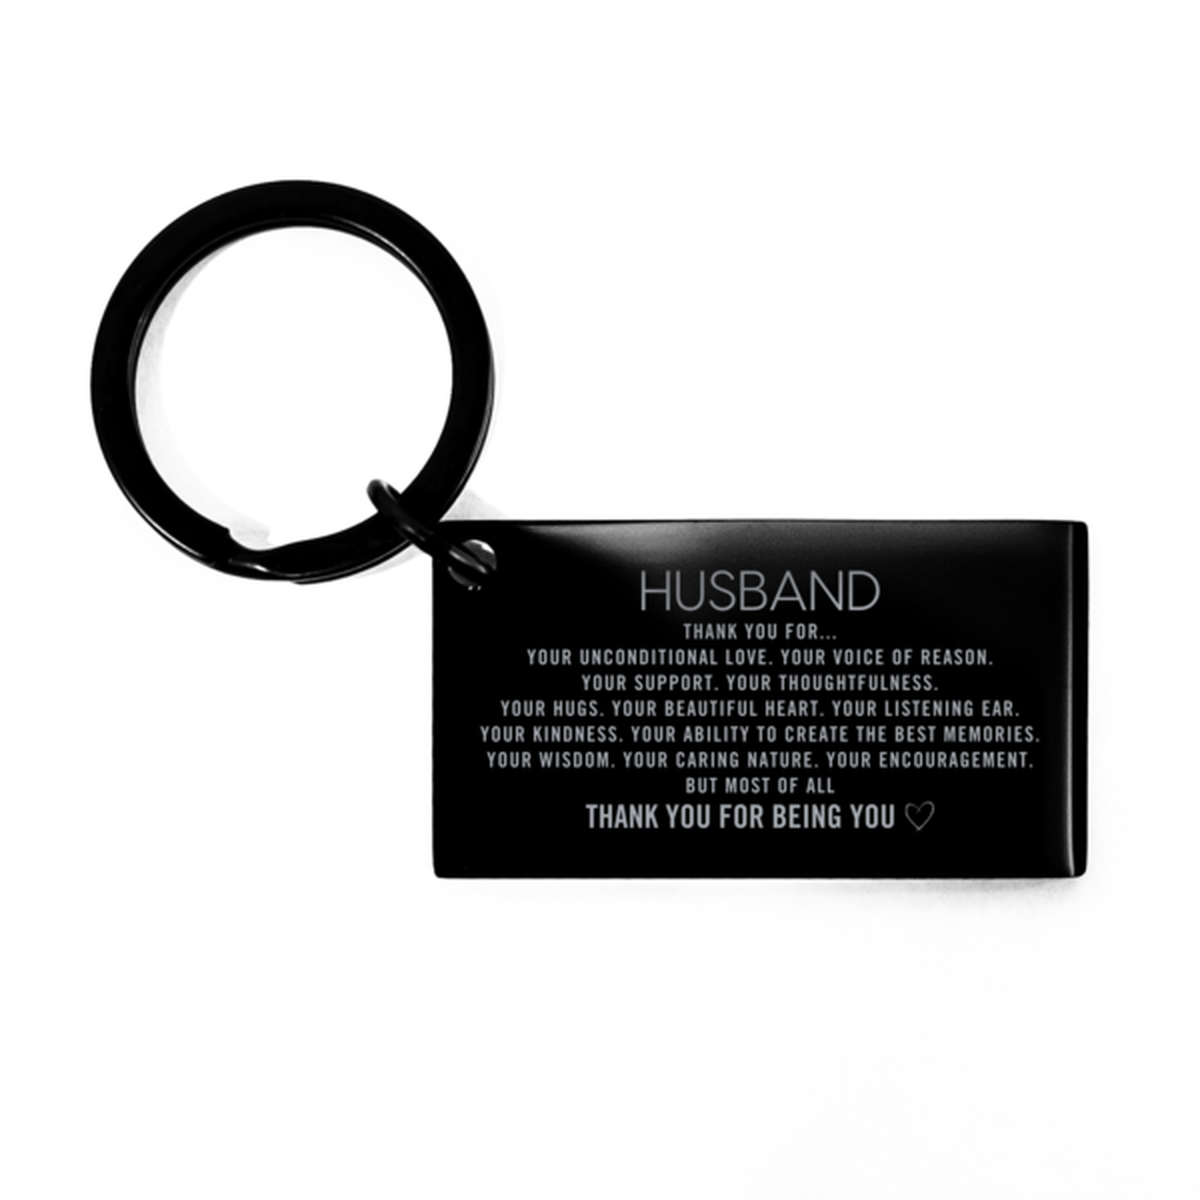 Husband Keychain Custom, Engraved Gifts For Husband Christmas Graduation Birthday Gifts for Men Women Husband Thank you for Your unconditional love